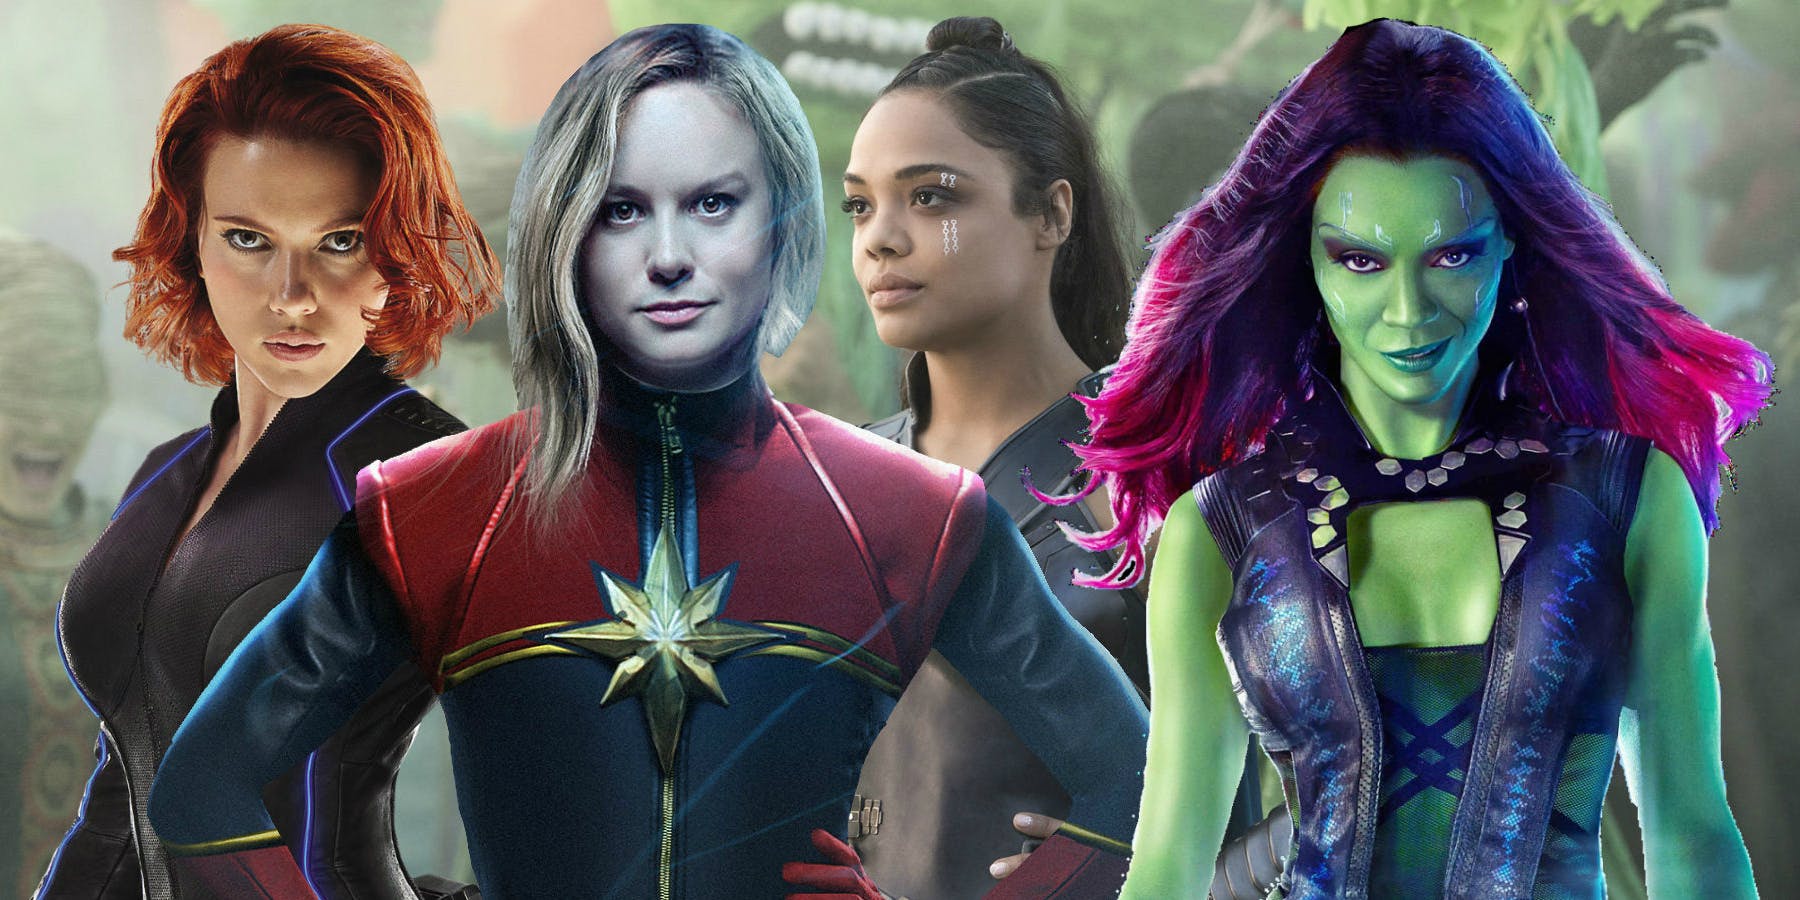 ‘Female-Led Superhero Films Are The Future,’ Predicts Box-Office Analysts